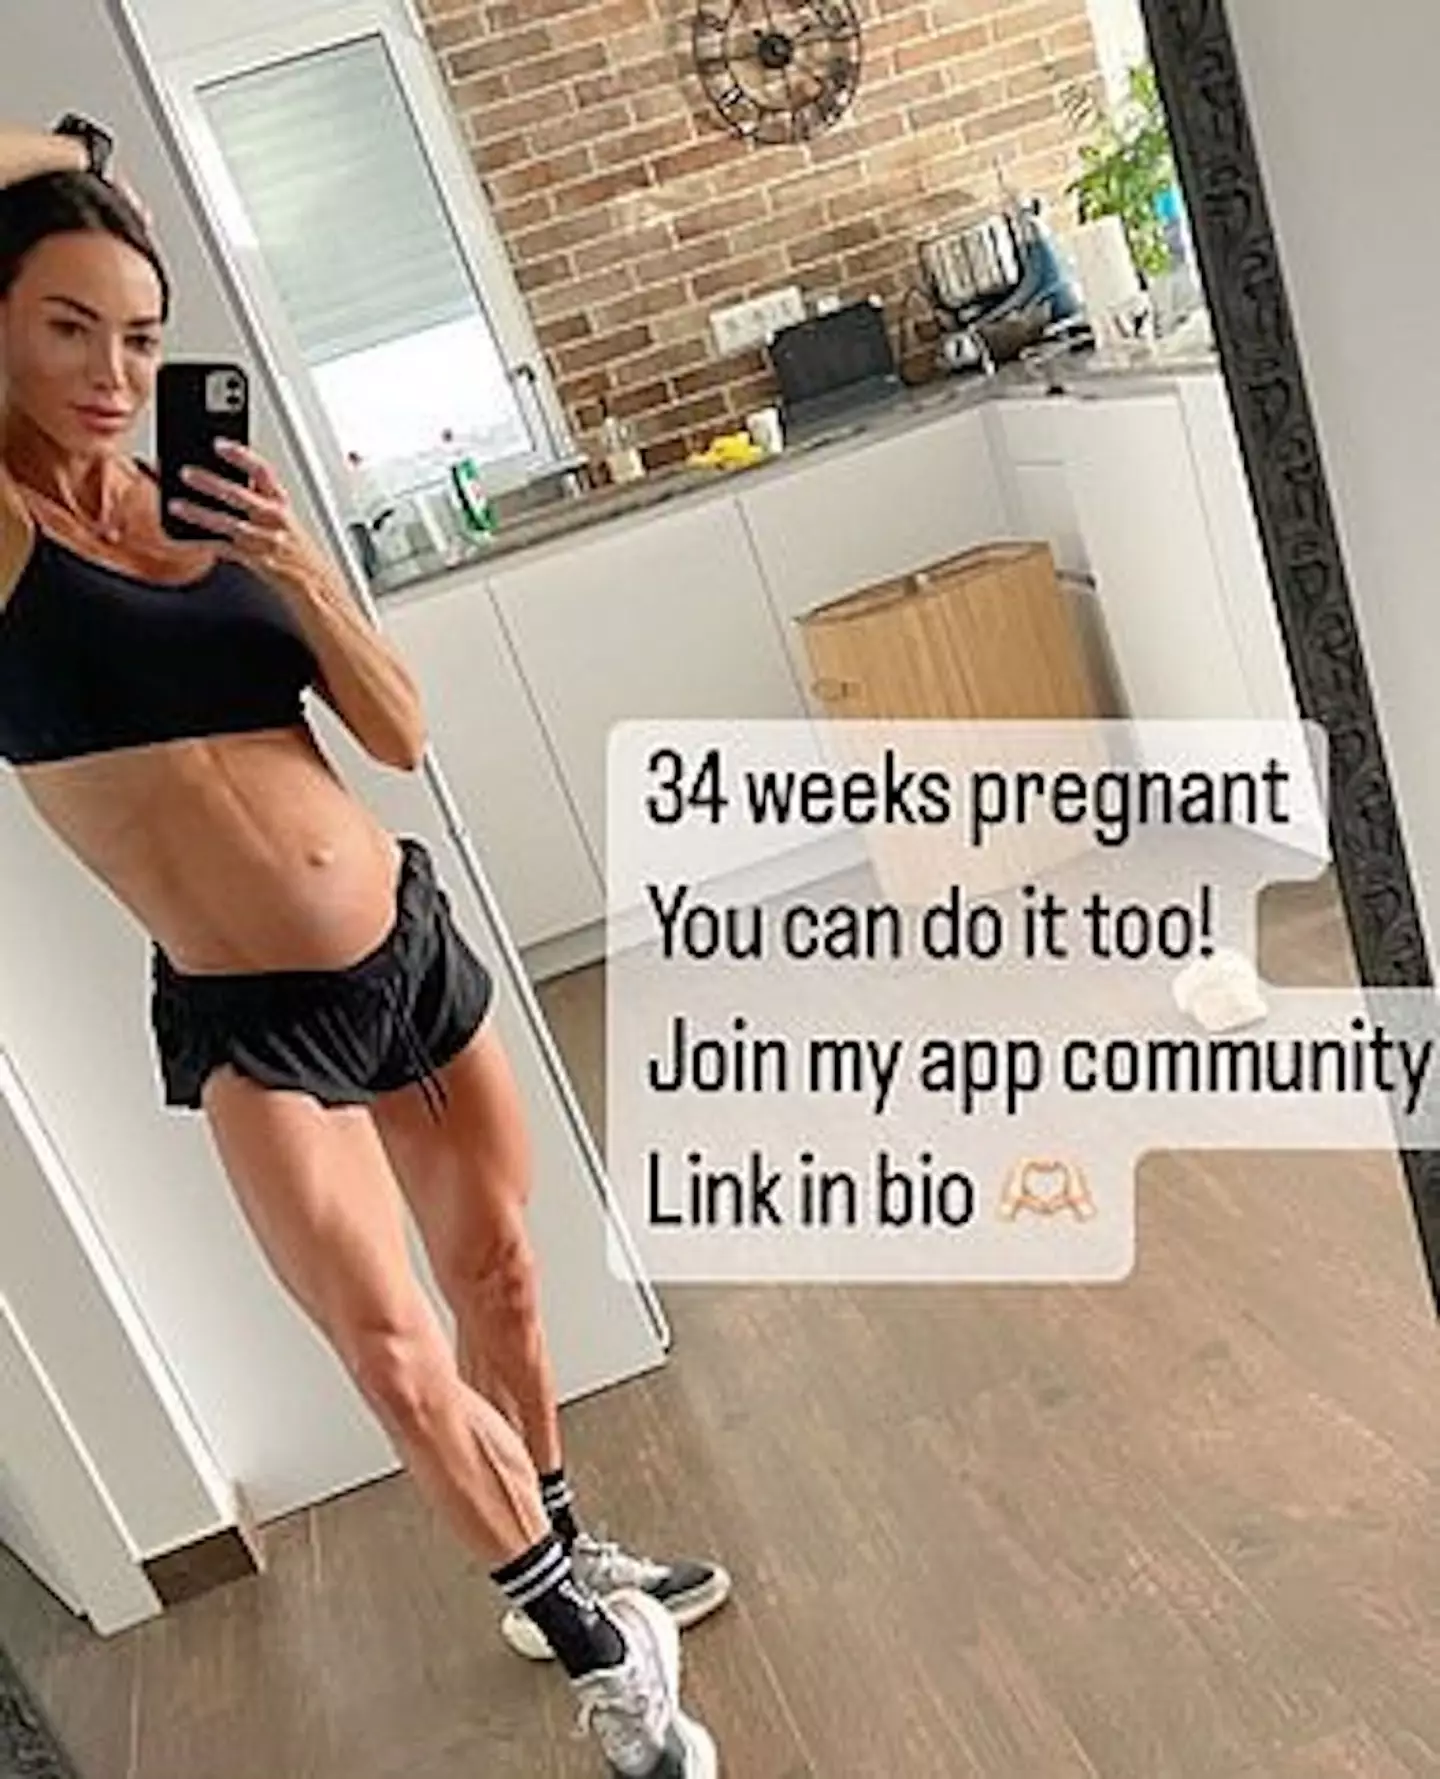 The editor-in-chief of Muscle and Health magazine says trolls would tell her that her child would be born 'premature or physically disabled'.